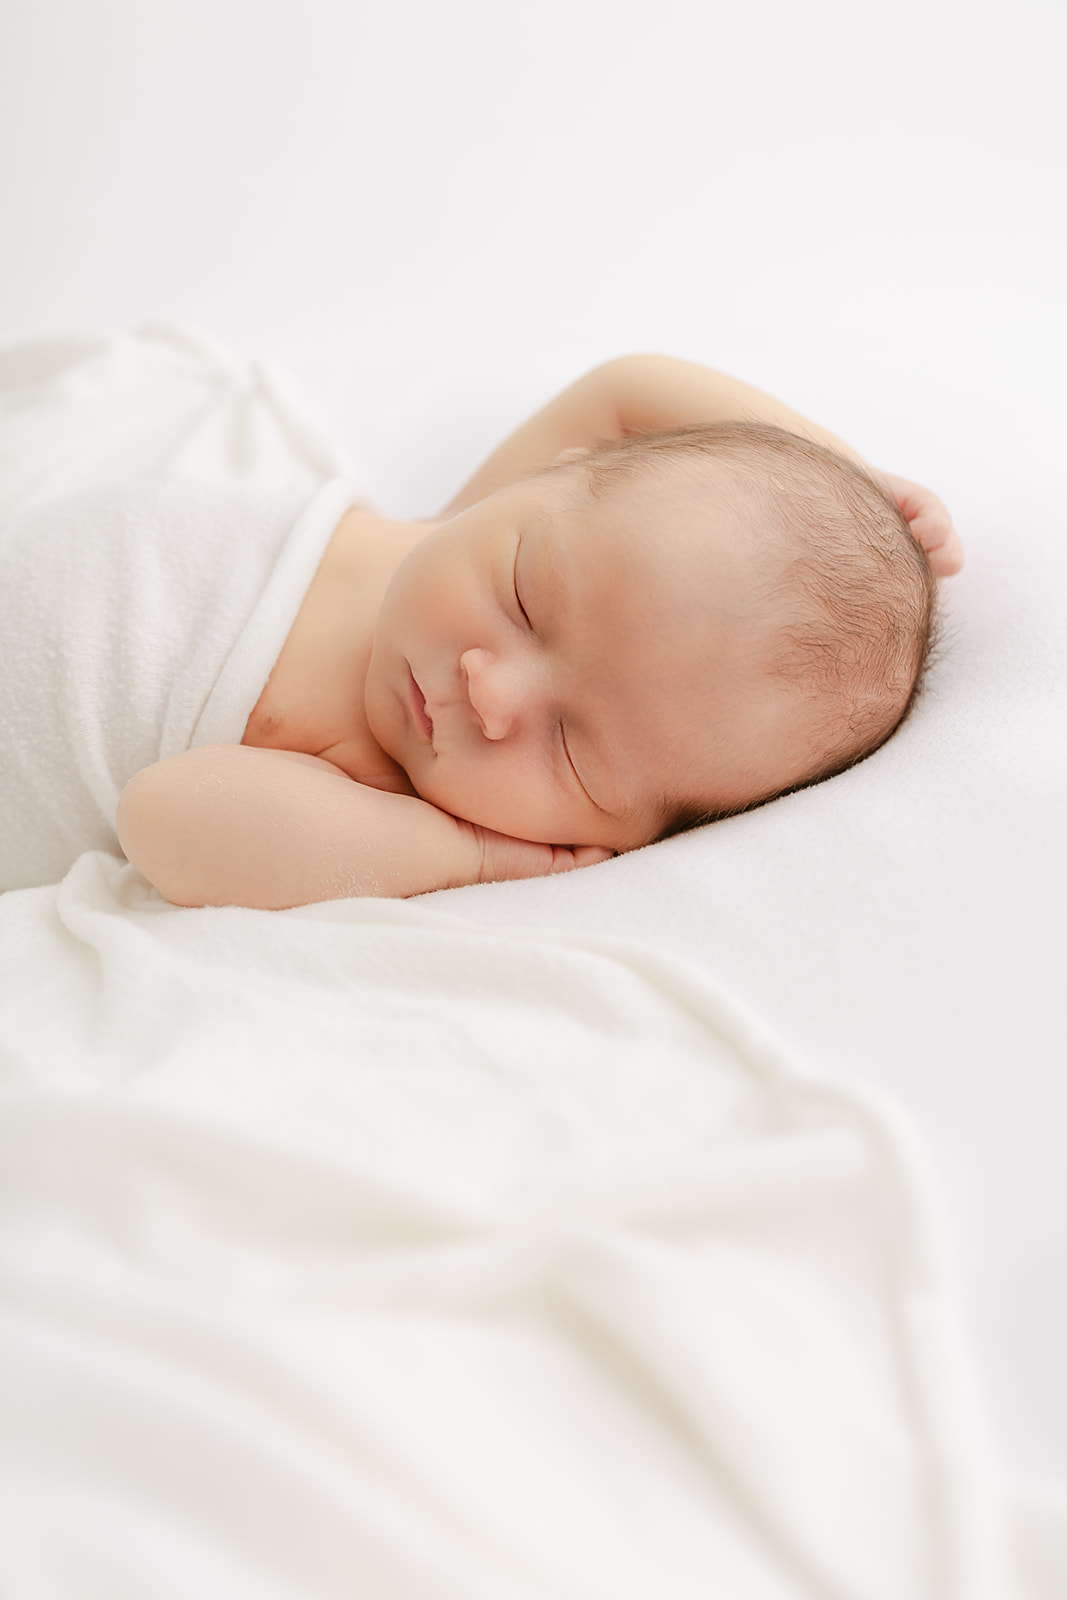 A newborn baby relaxes on a white bed in a studio